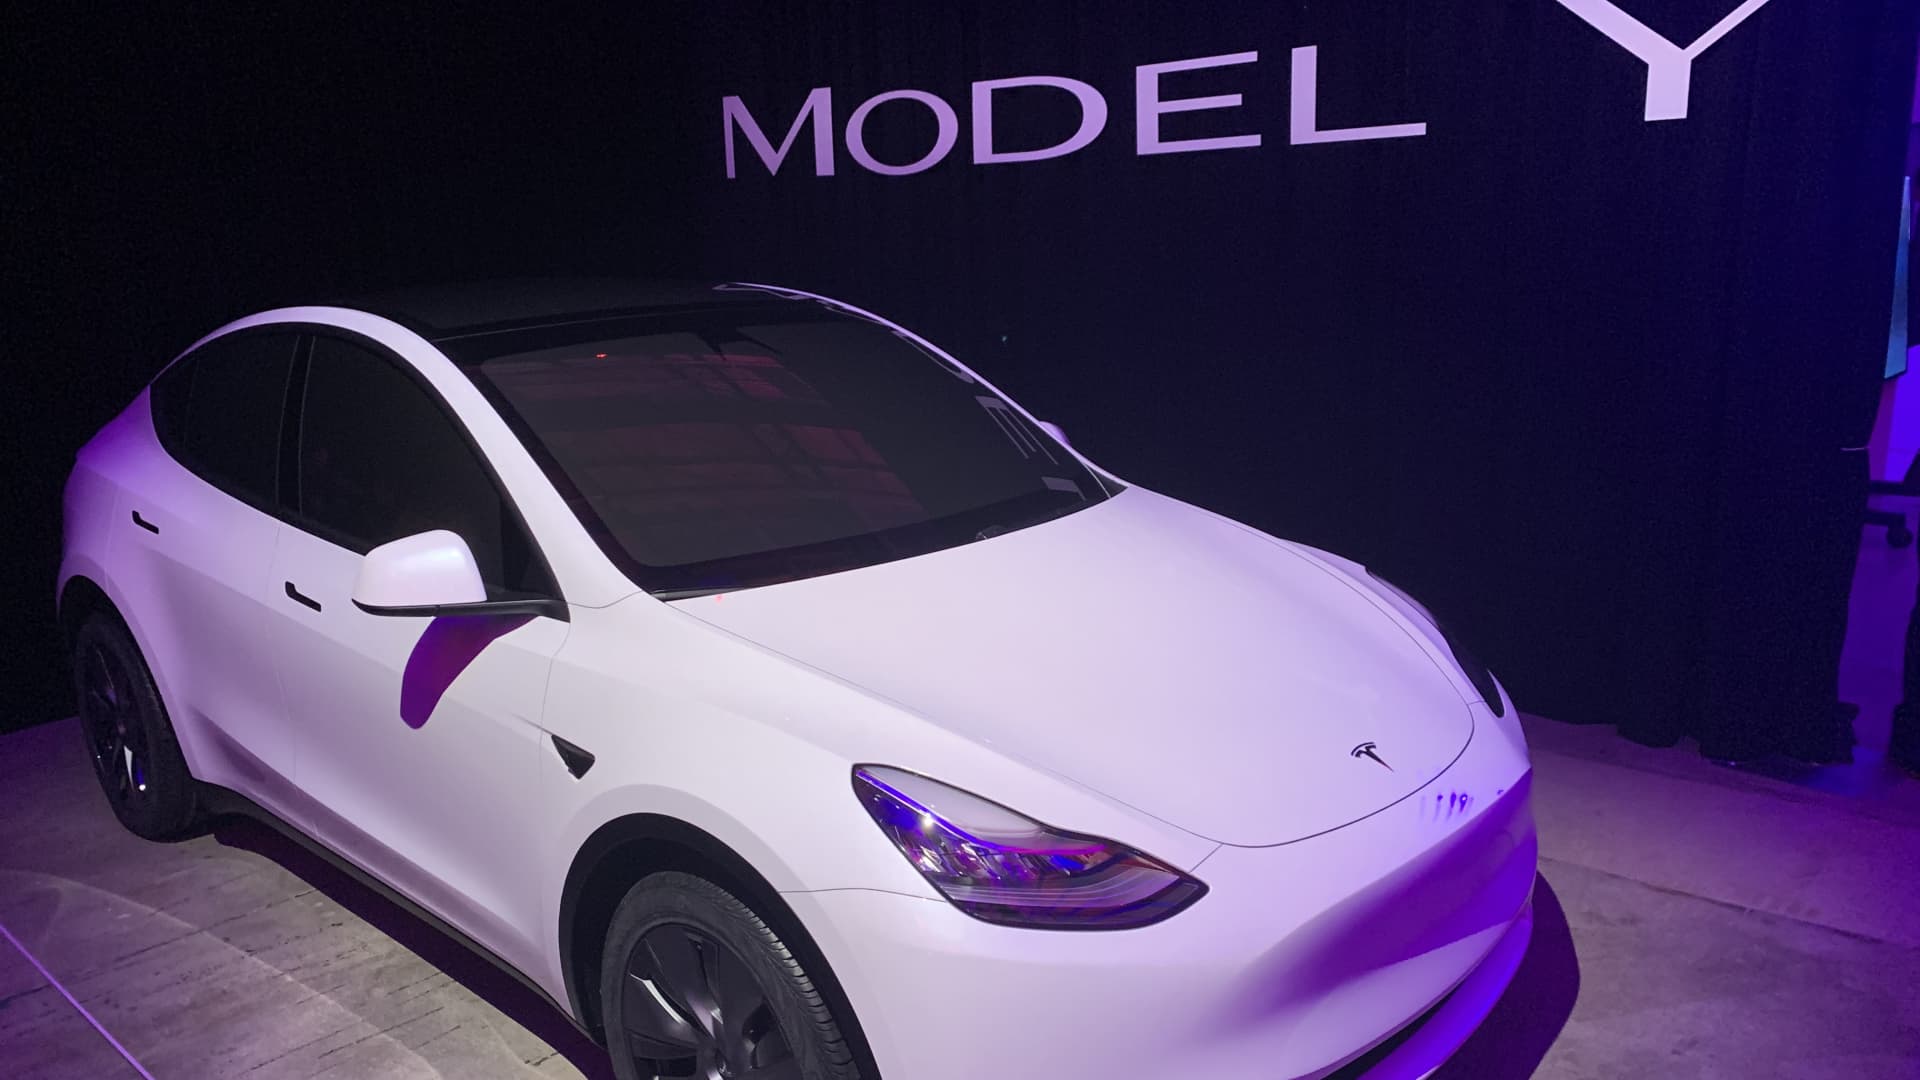 The new Tesla Model Y is introduced. Tesla has expanded its model range to include an SUV based on the current Model 3.